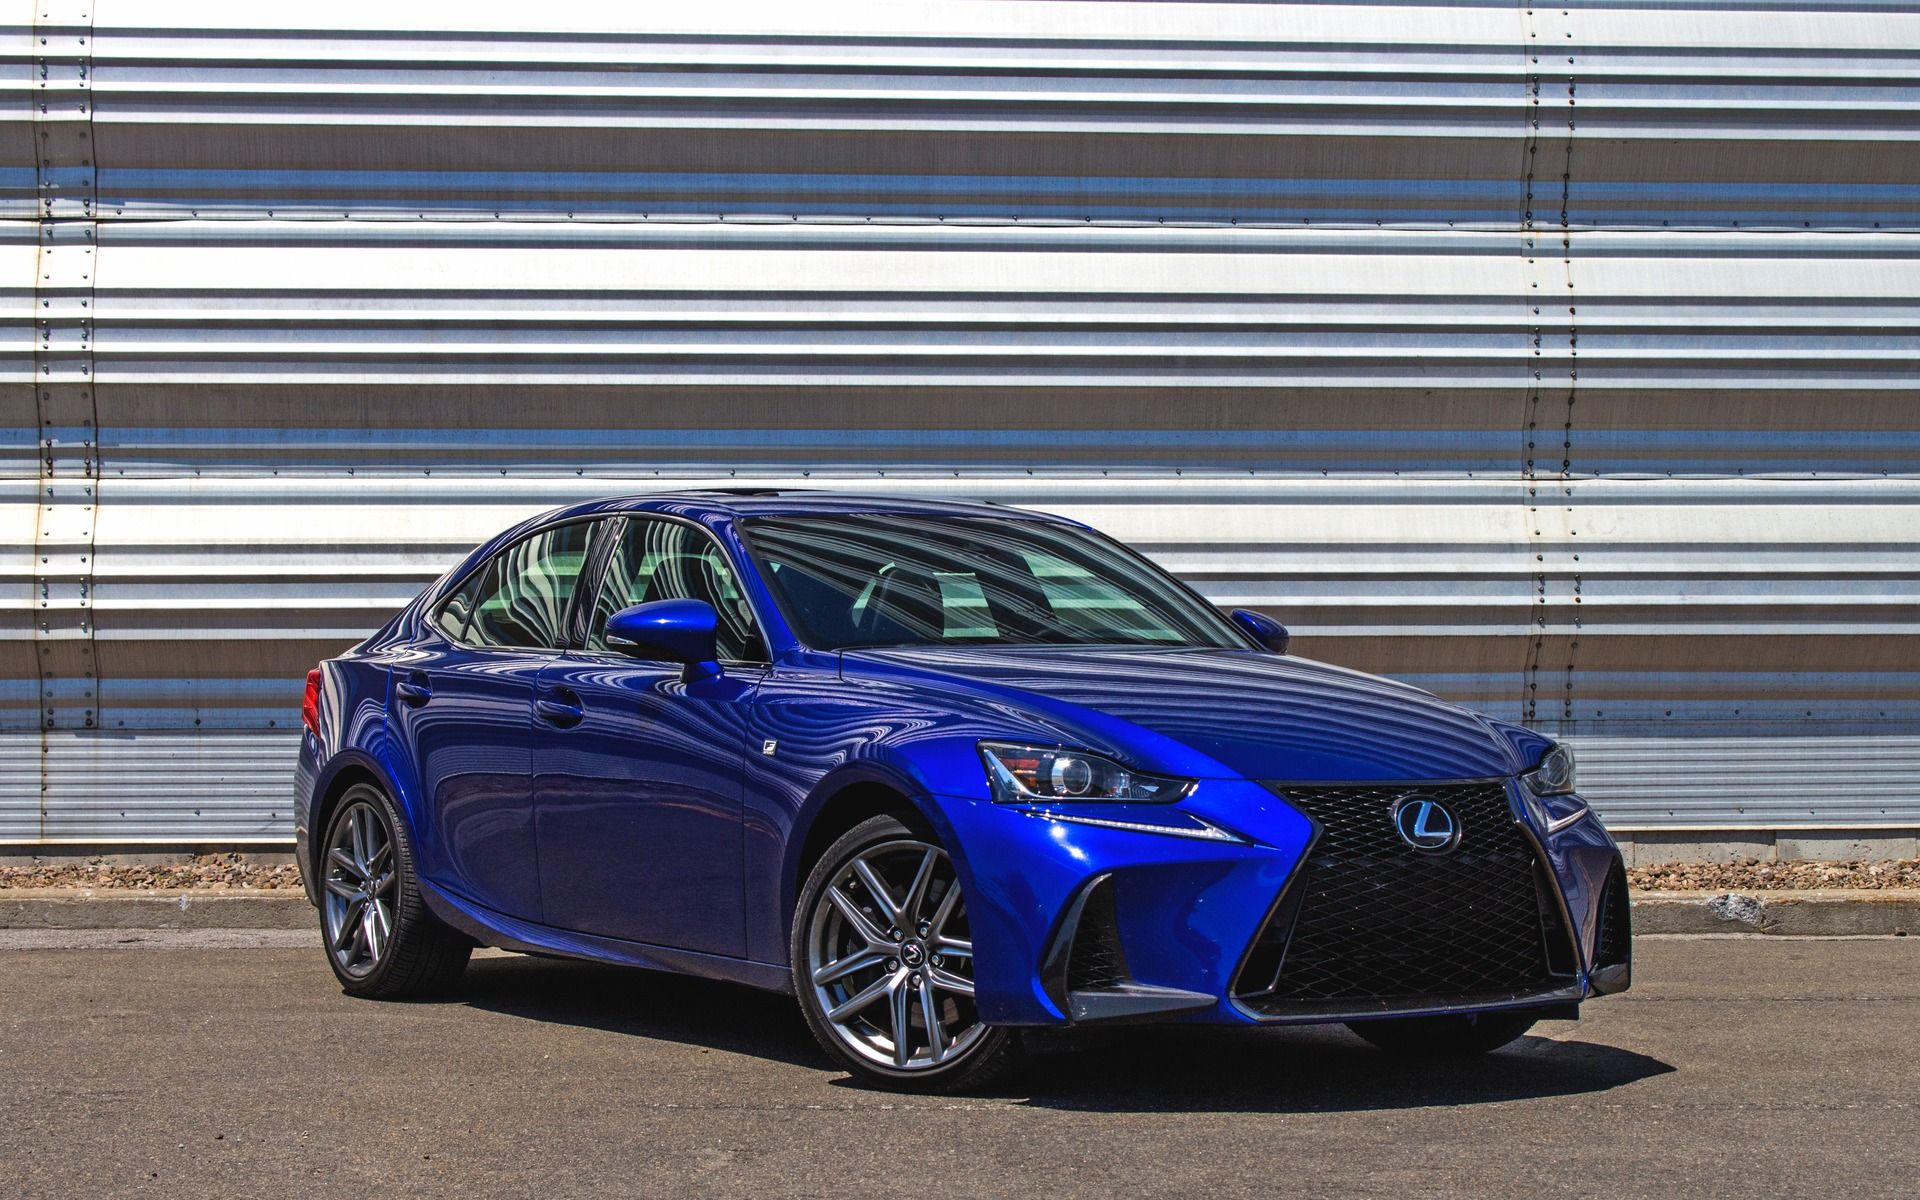 Lexus IS 350 F SPORT: The 3 Series BMW Used to Build